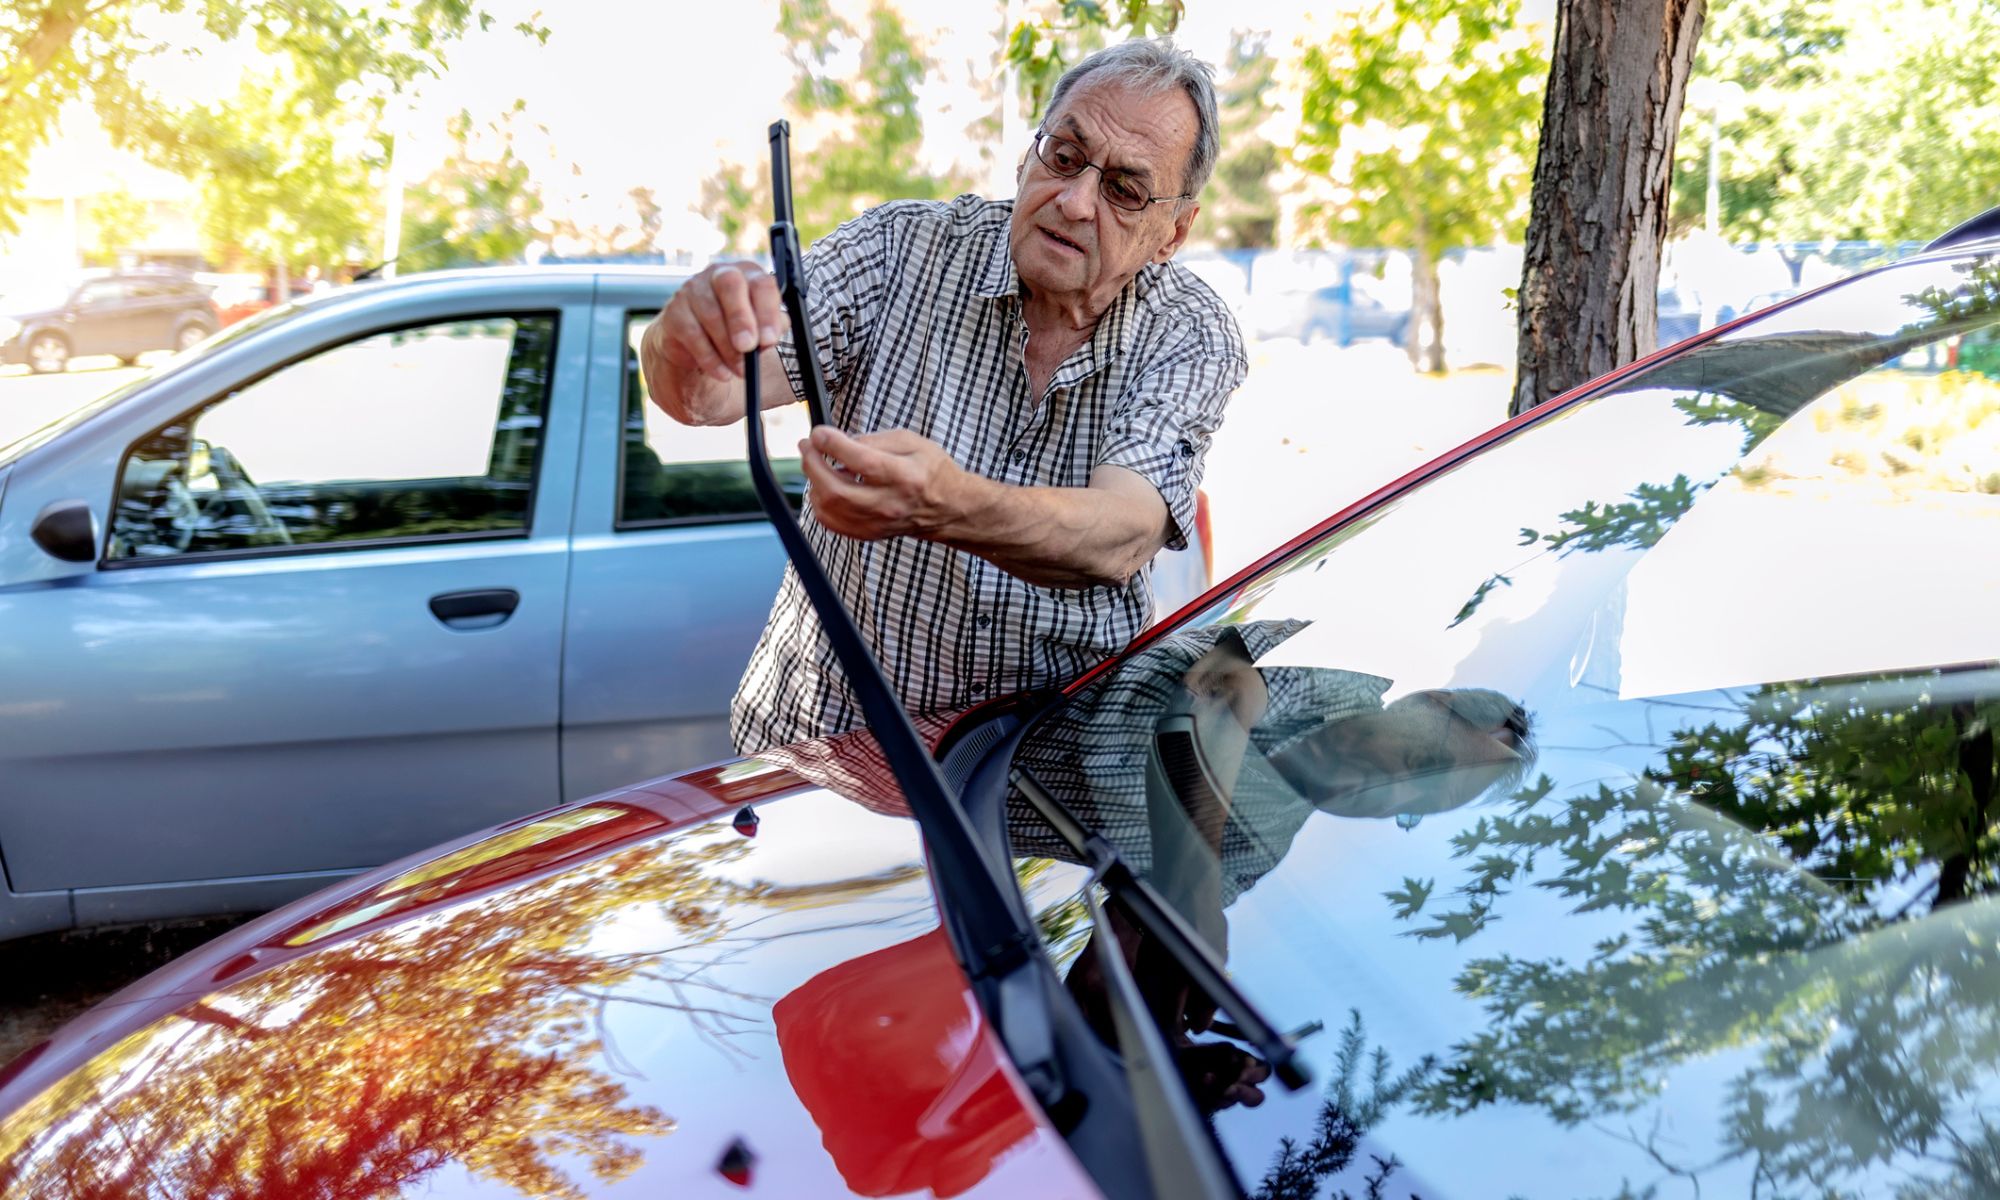 Elderly man with eyeglasses picking up windshield wiper and checking it